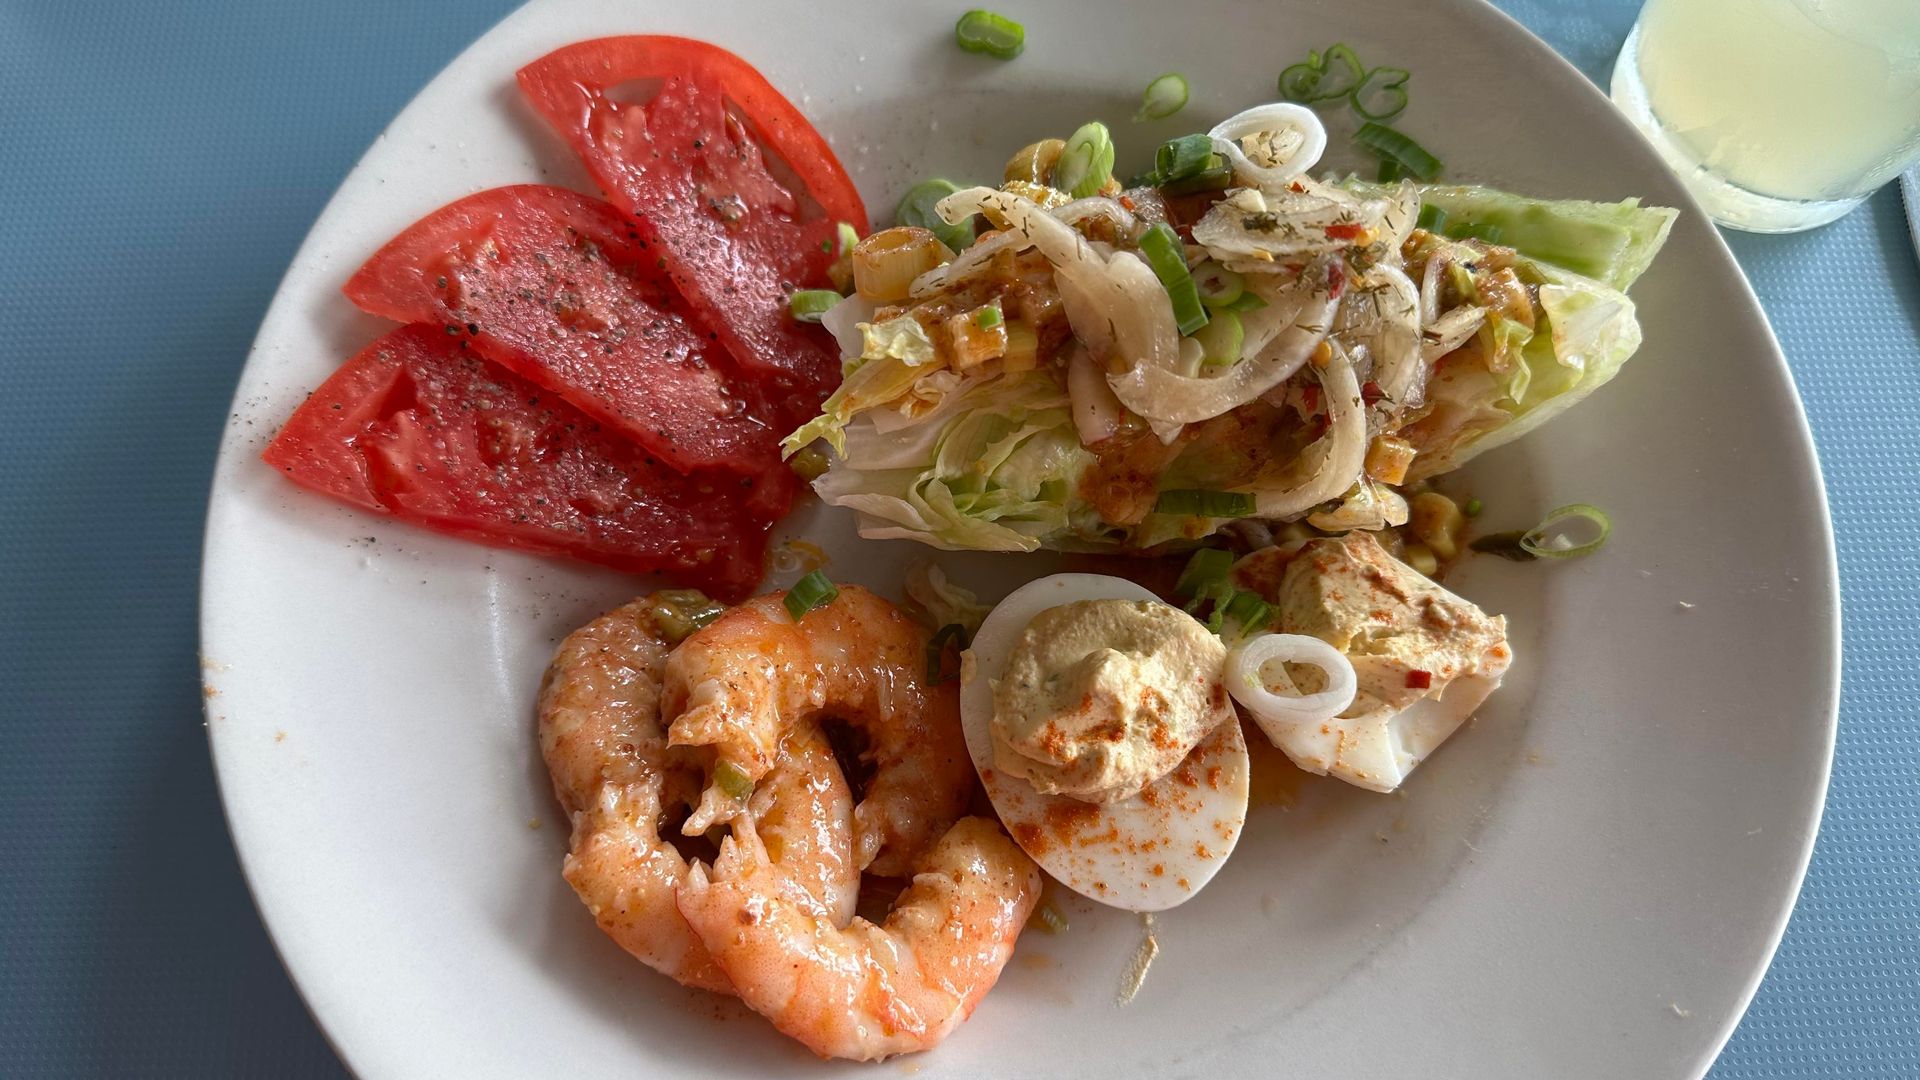 Photo shows a wedge salad with remoulade dressing, deviled eggs, cooked shrimp, sliced tomatoes and a glass of lemonade.